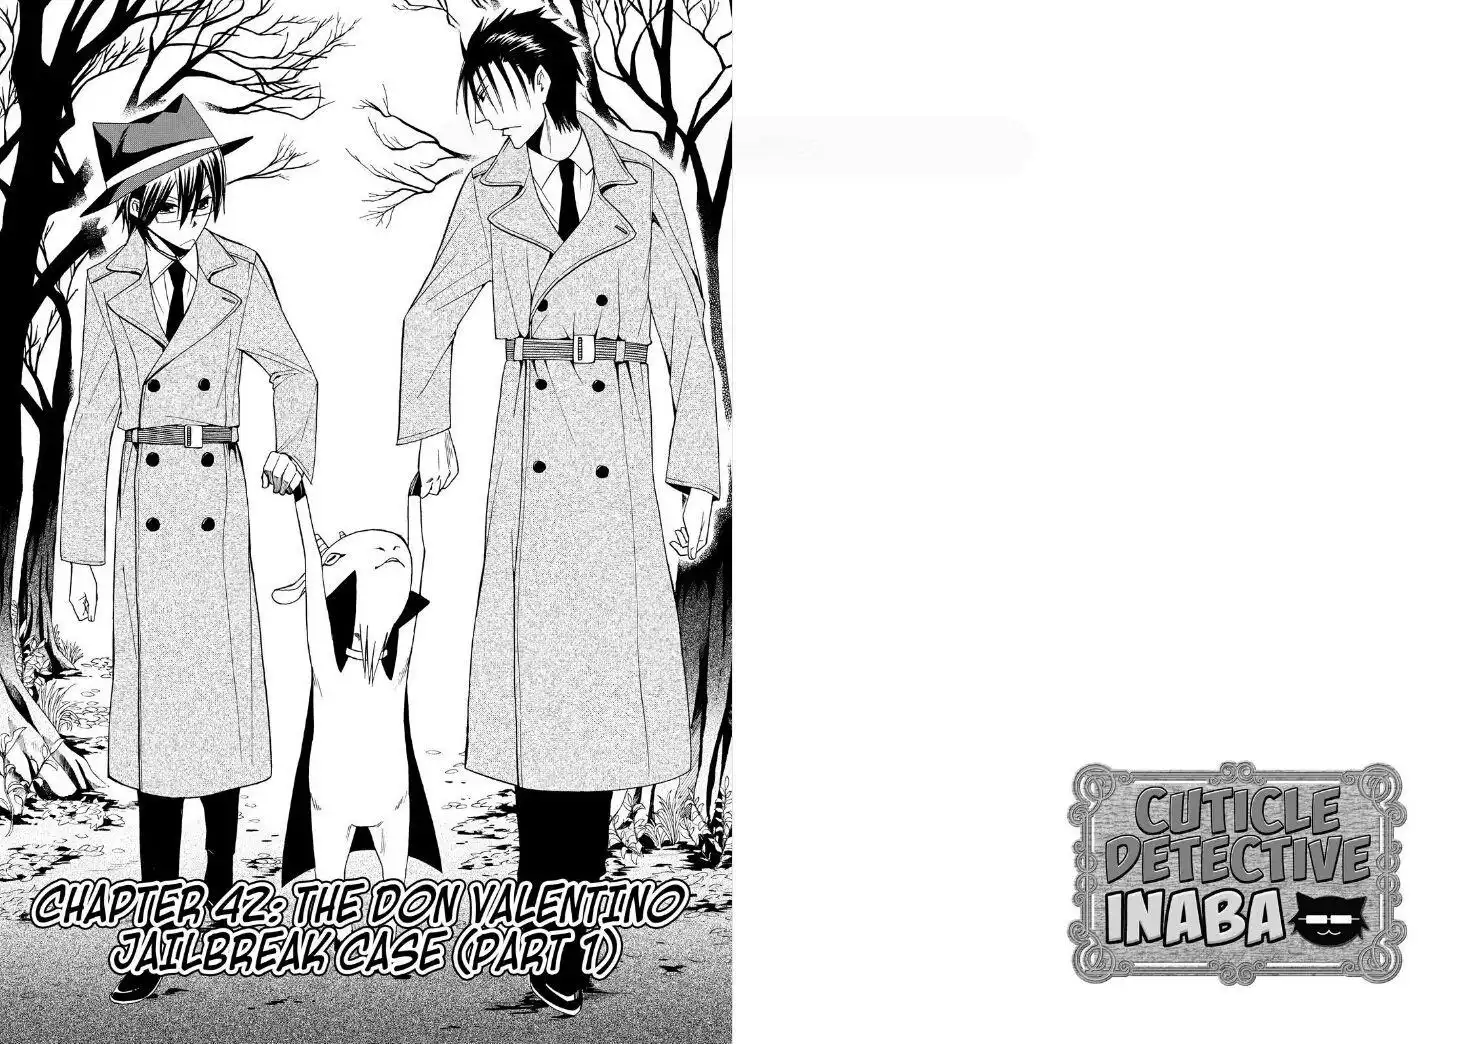 Cuticle Detective Chapter 42